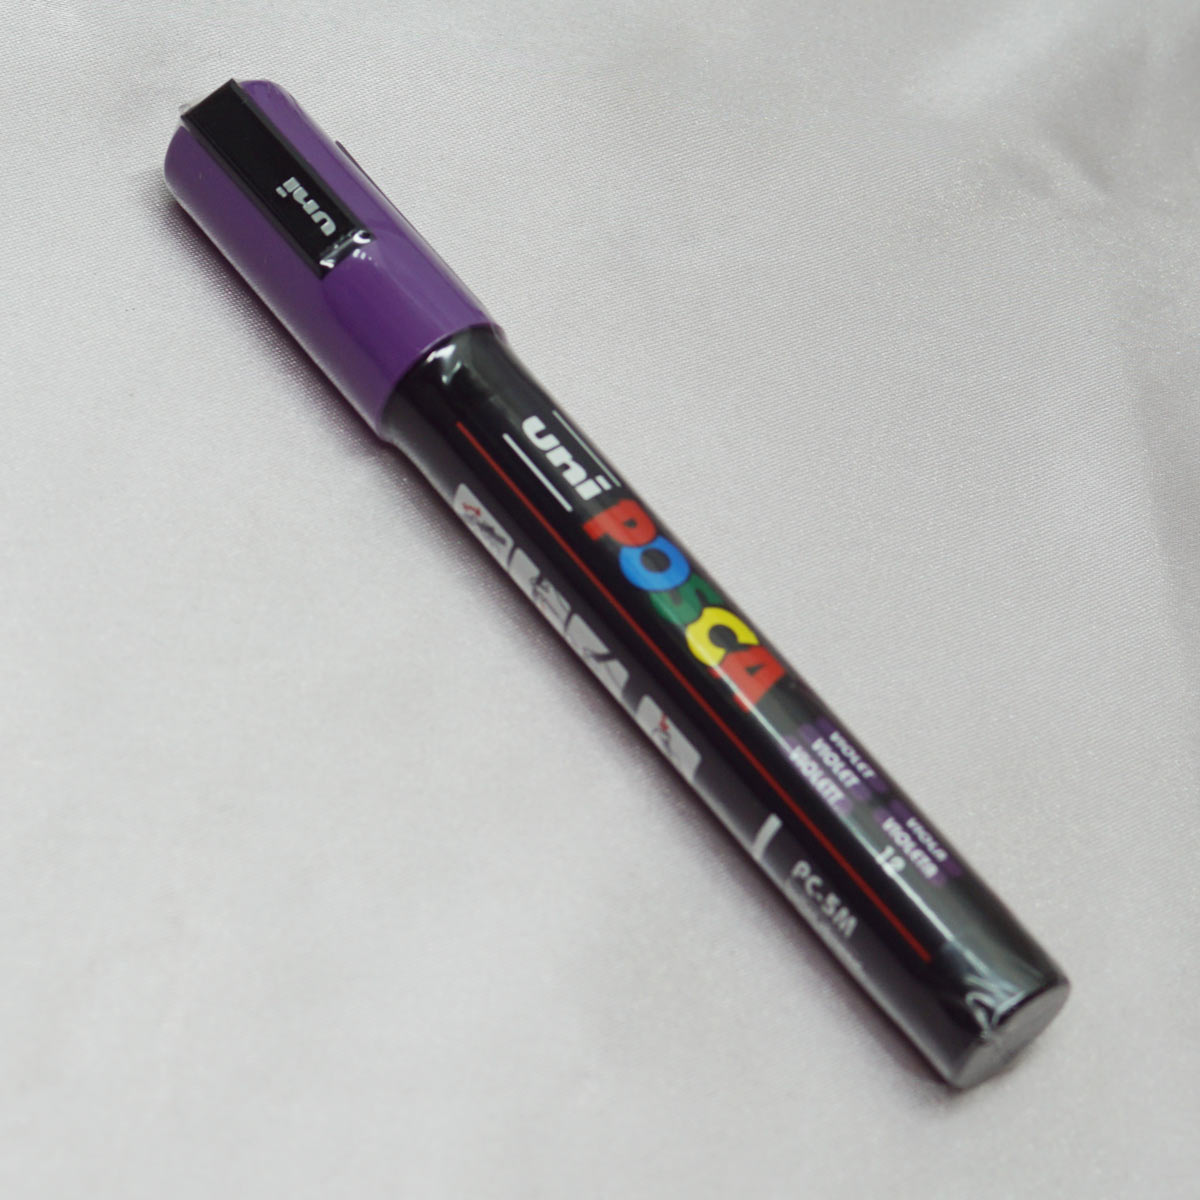 Uniball Posca PC-5M Bullet Medium Tip 1.8 - 2.5mm Opaque Violet Color and Water Based Paint Marker SKU 22476